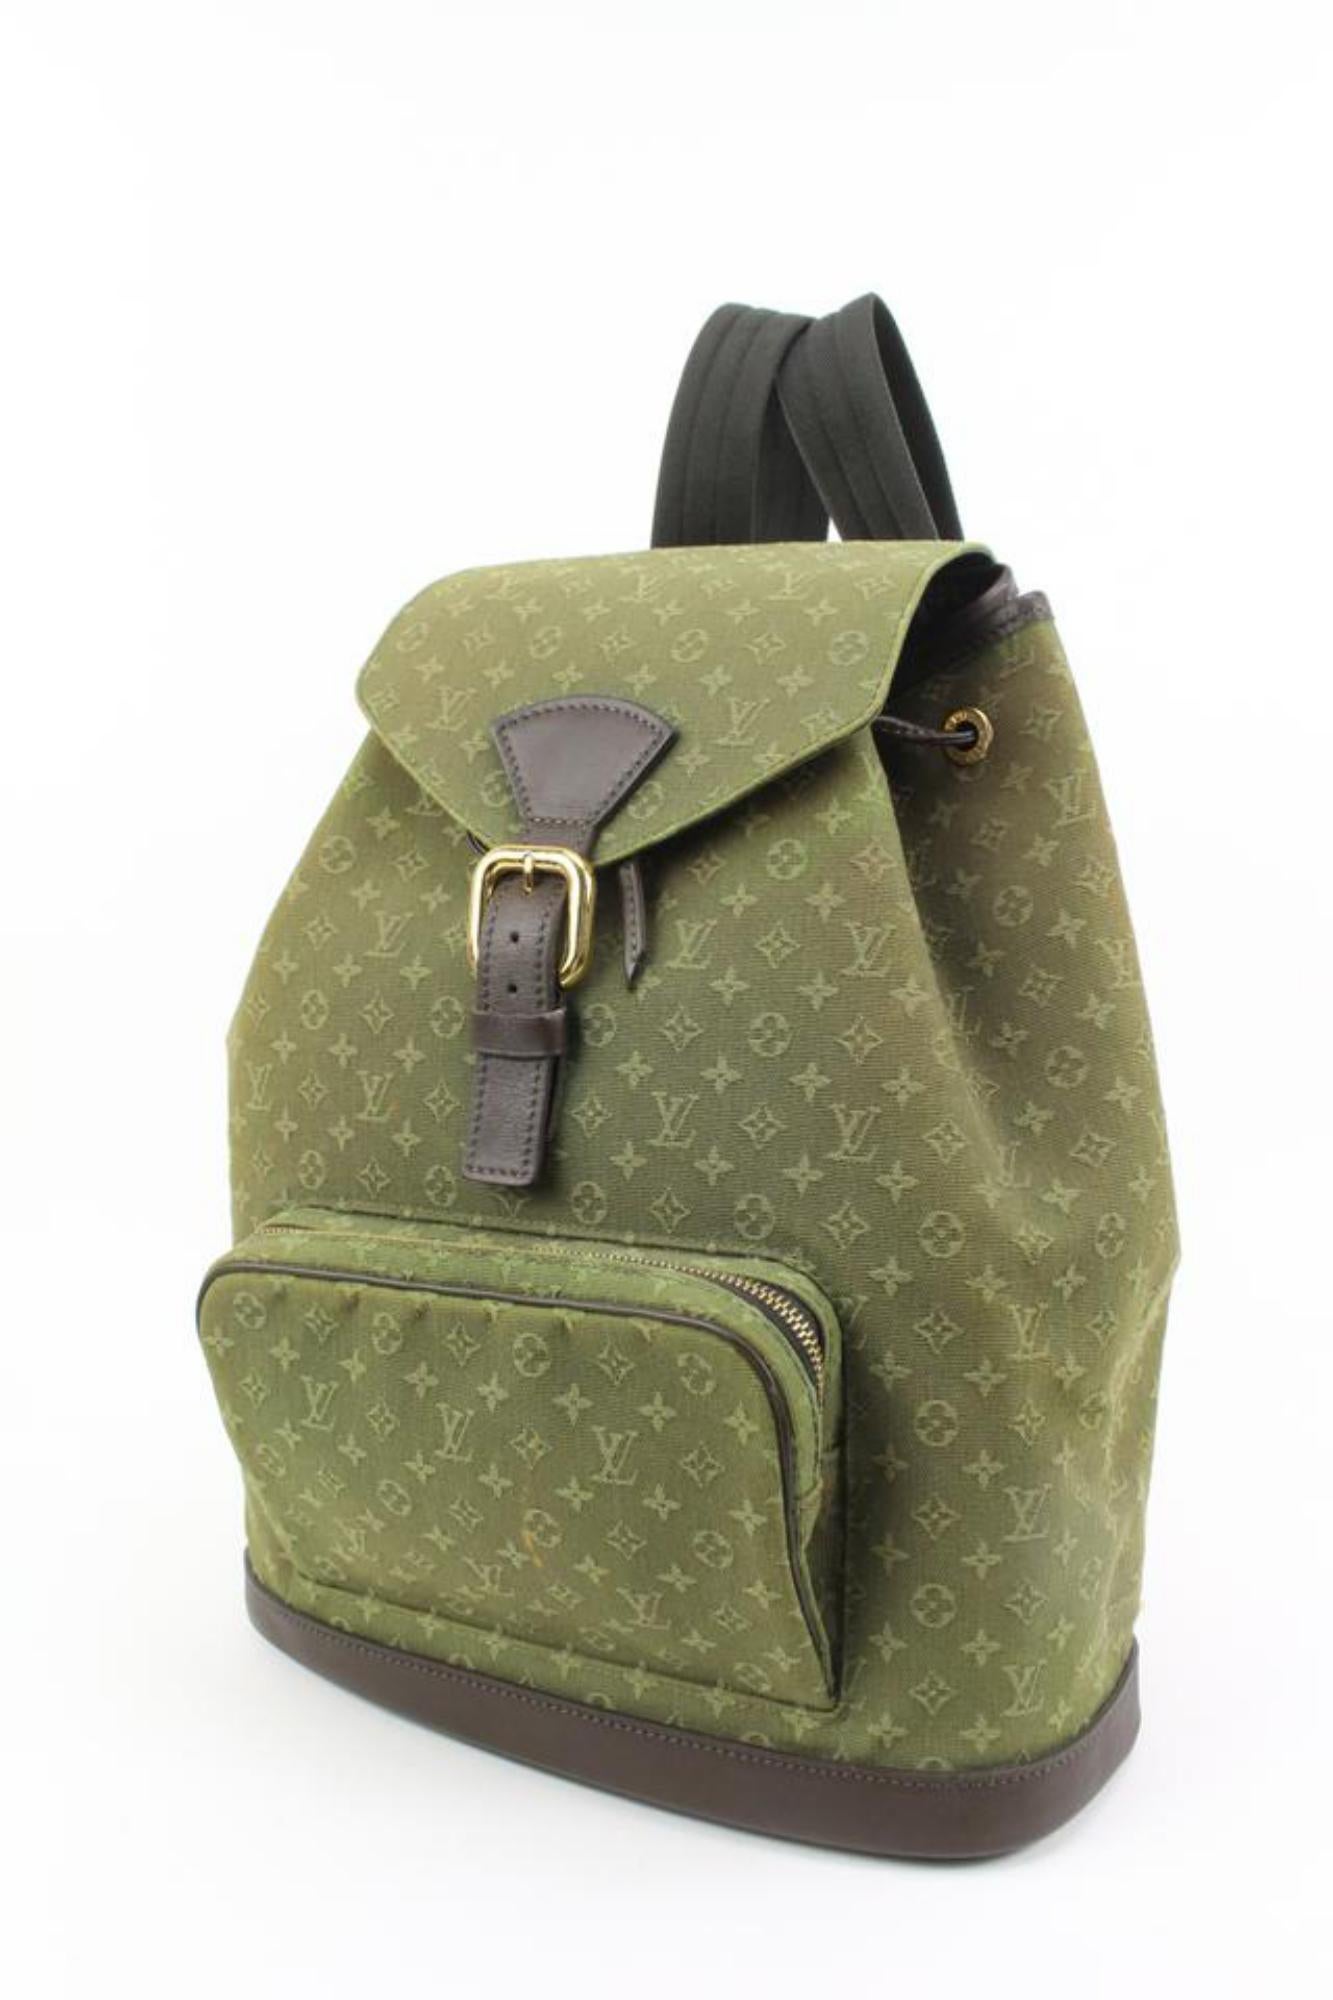 Louis Vuitton Olive Khaki Mini Lin Montsouris GM Backpack 94lk33s
Date Code/Serial Number: SP0053
Made In: France
Measurements: Length:  16